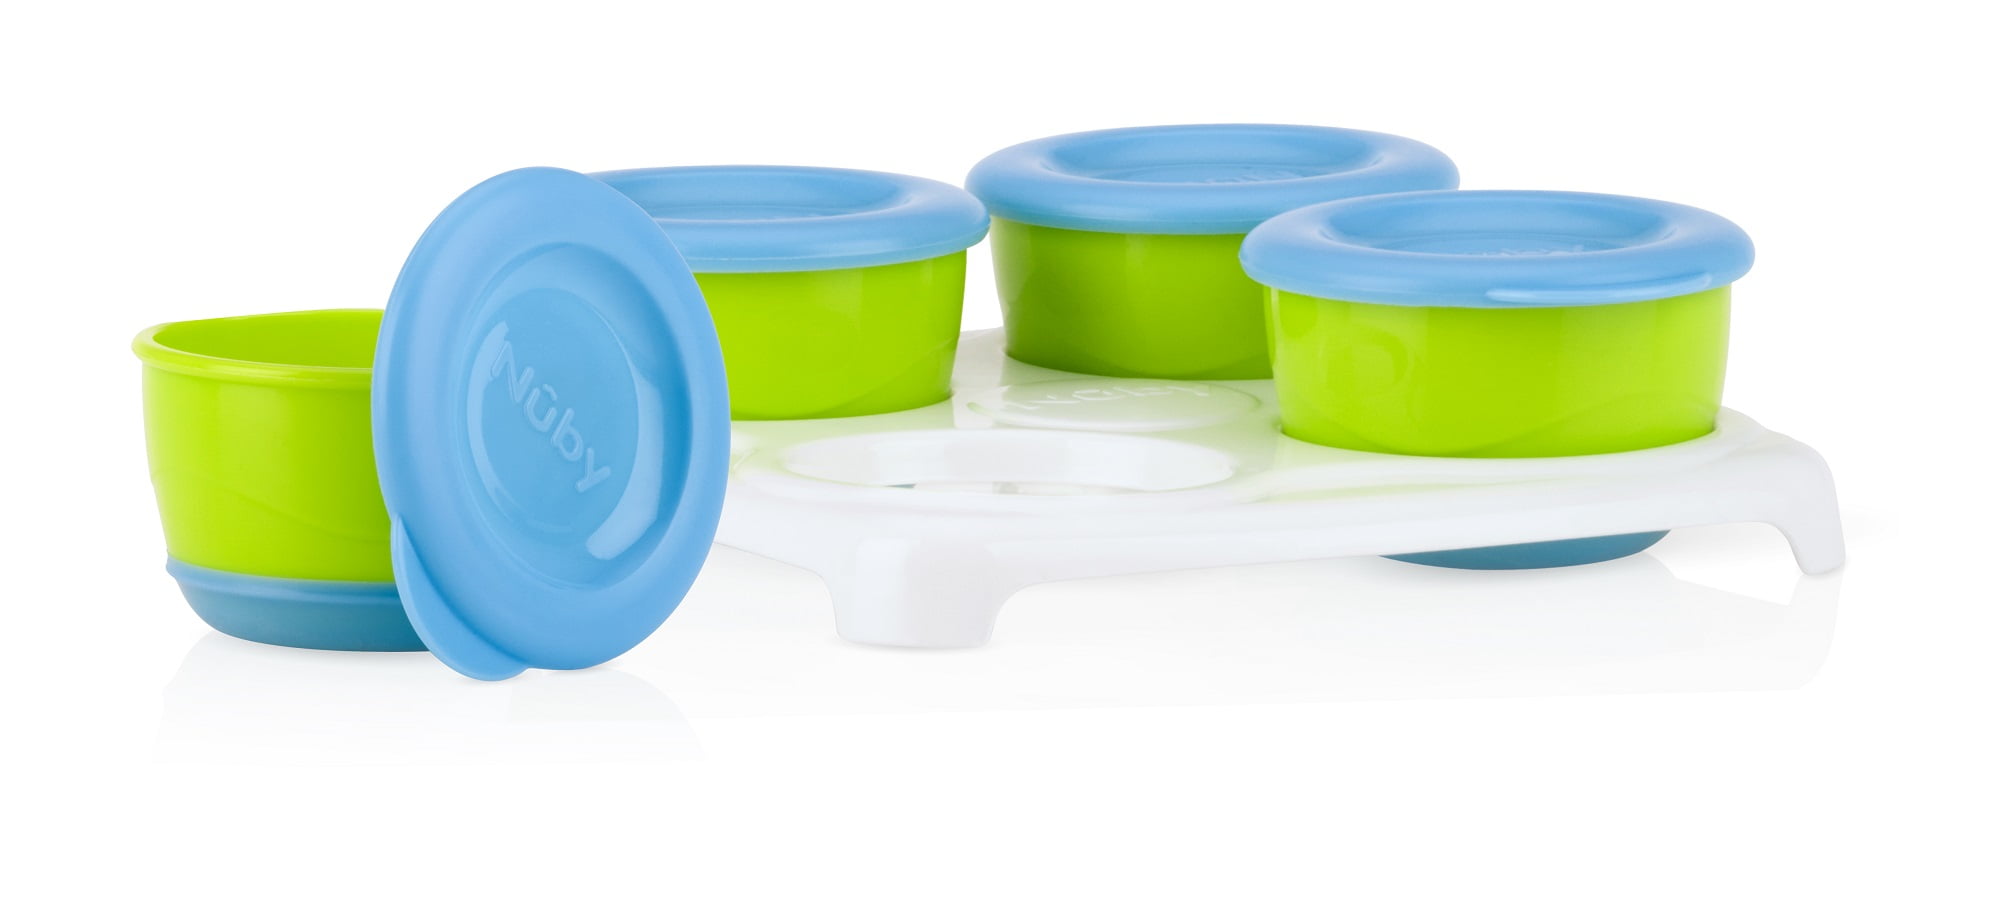 WeeSprout Baby Food Containers - Small 4 oz Containers with Lids